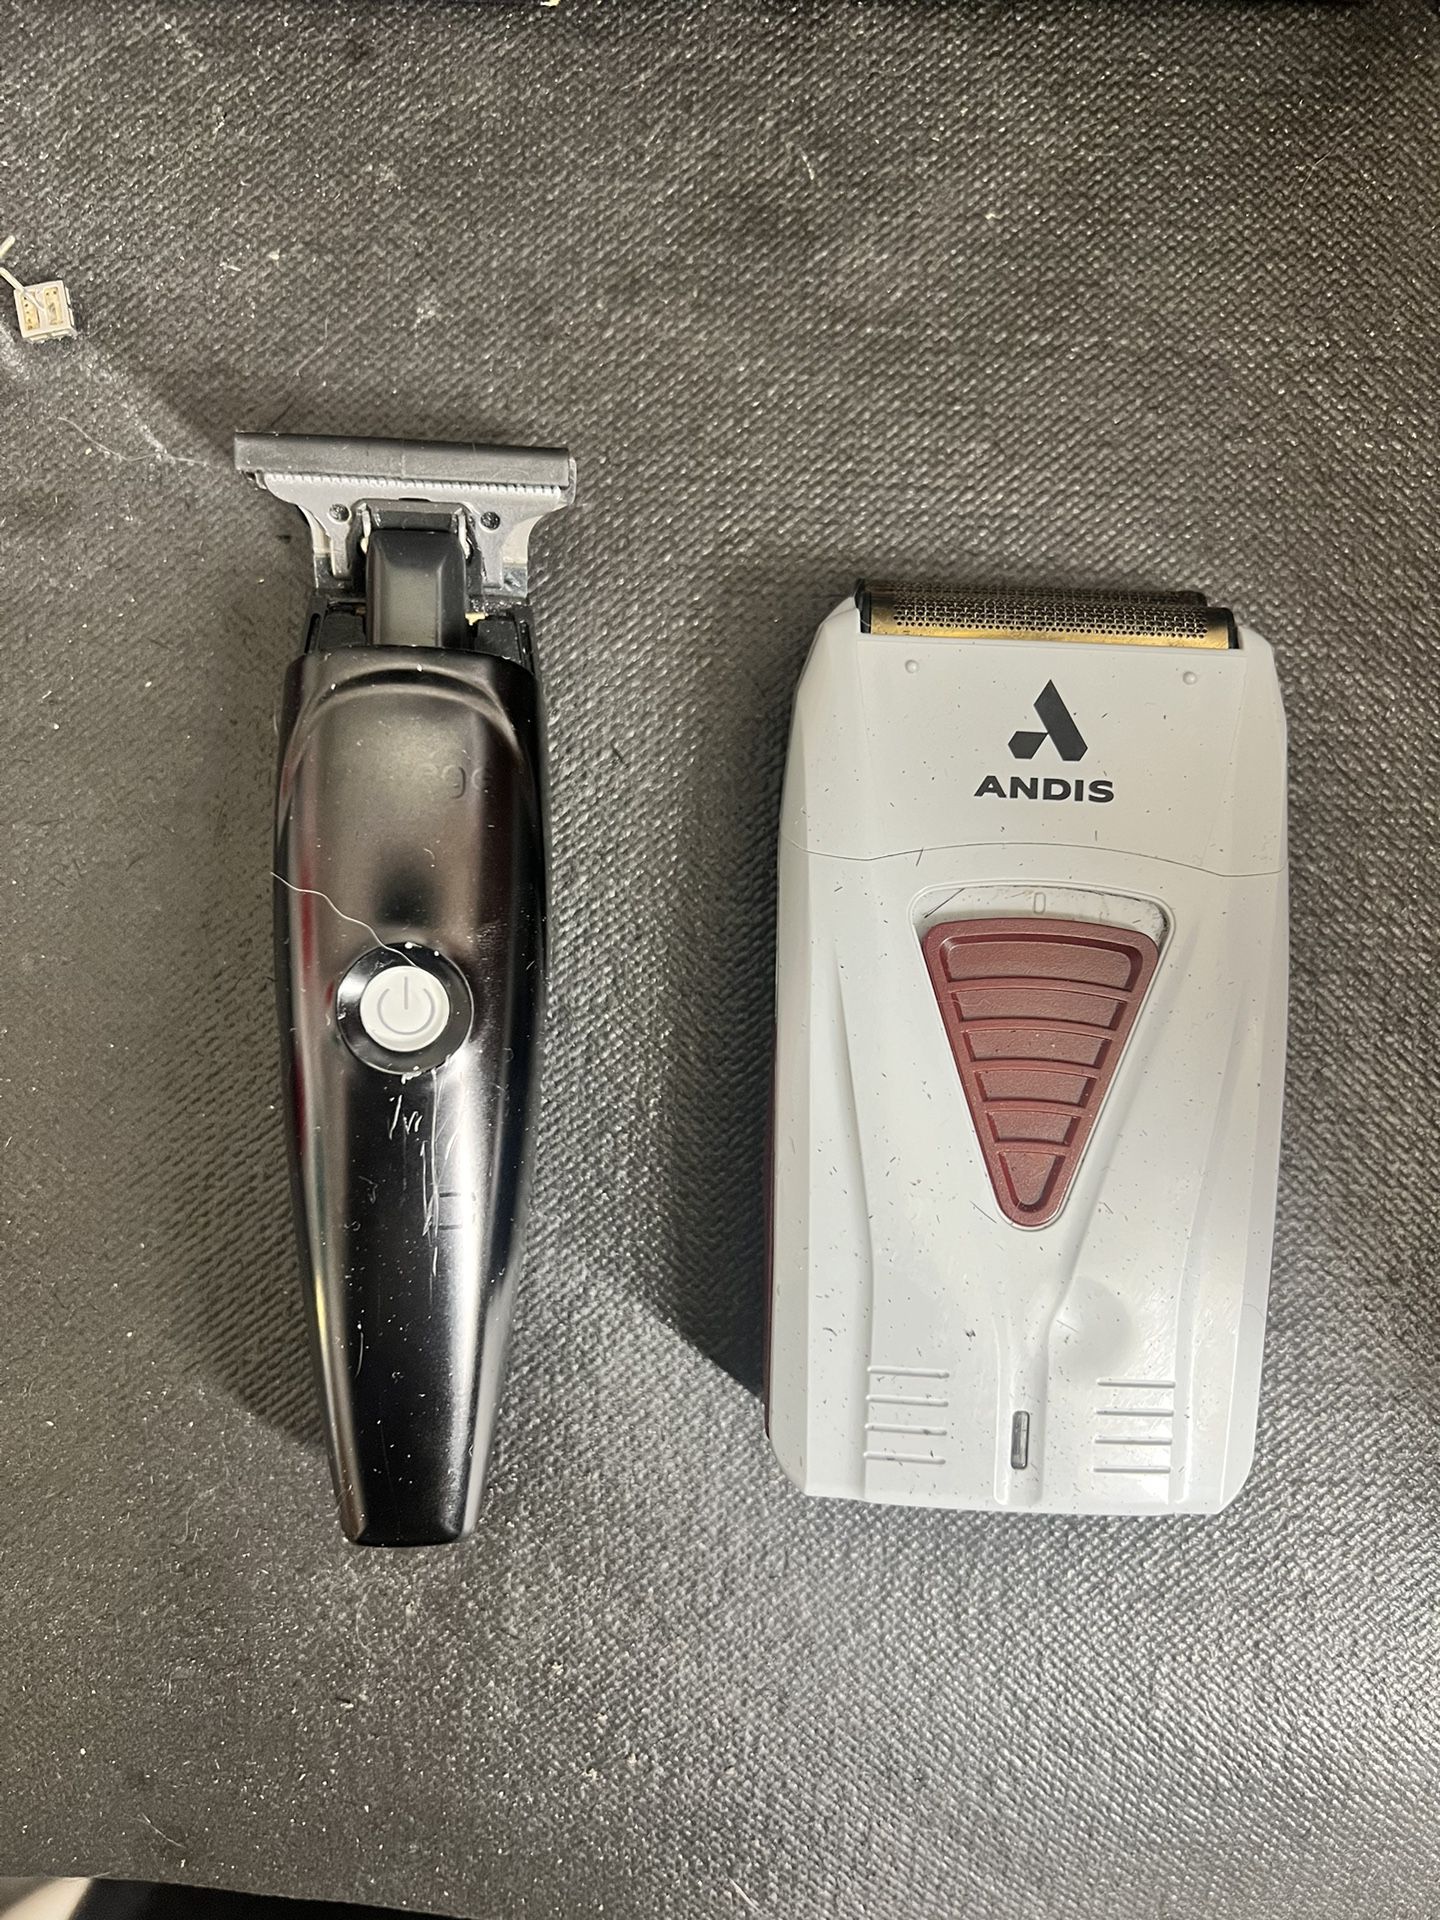 Style Craft Protege Trimmer & Andis Shaver 